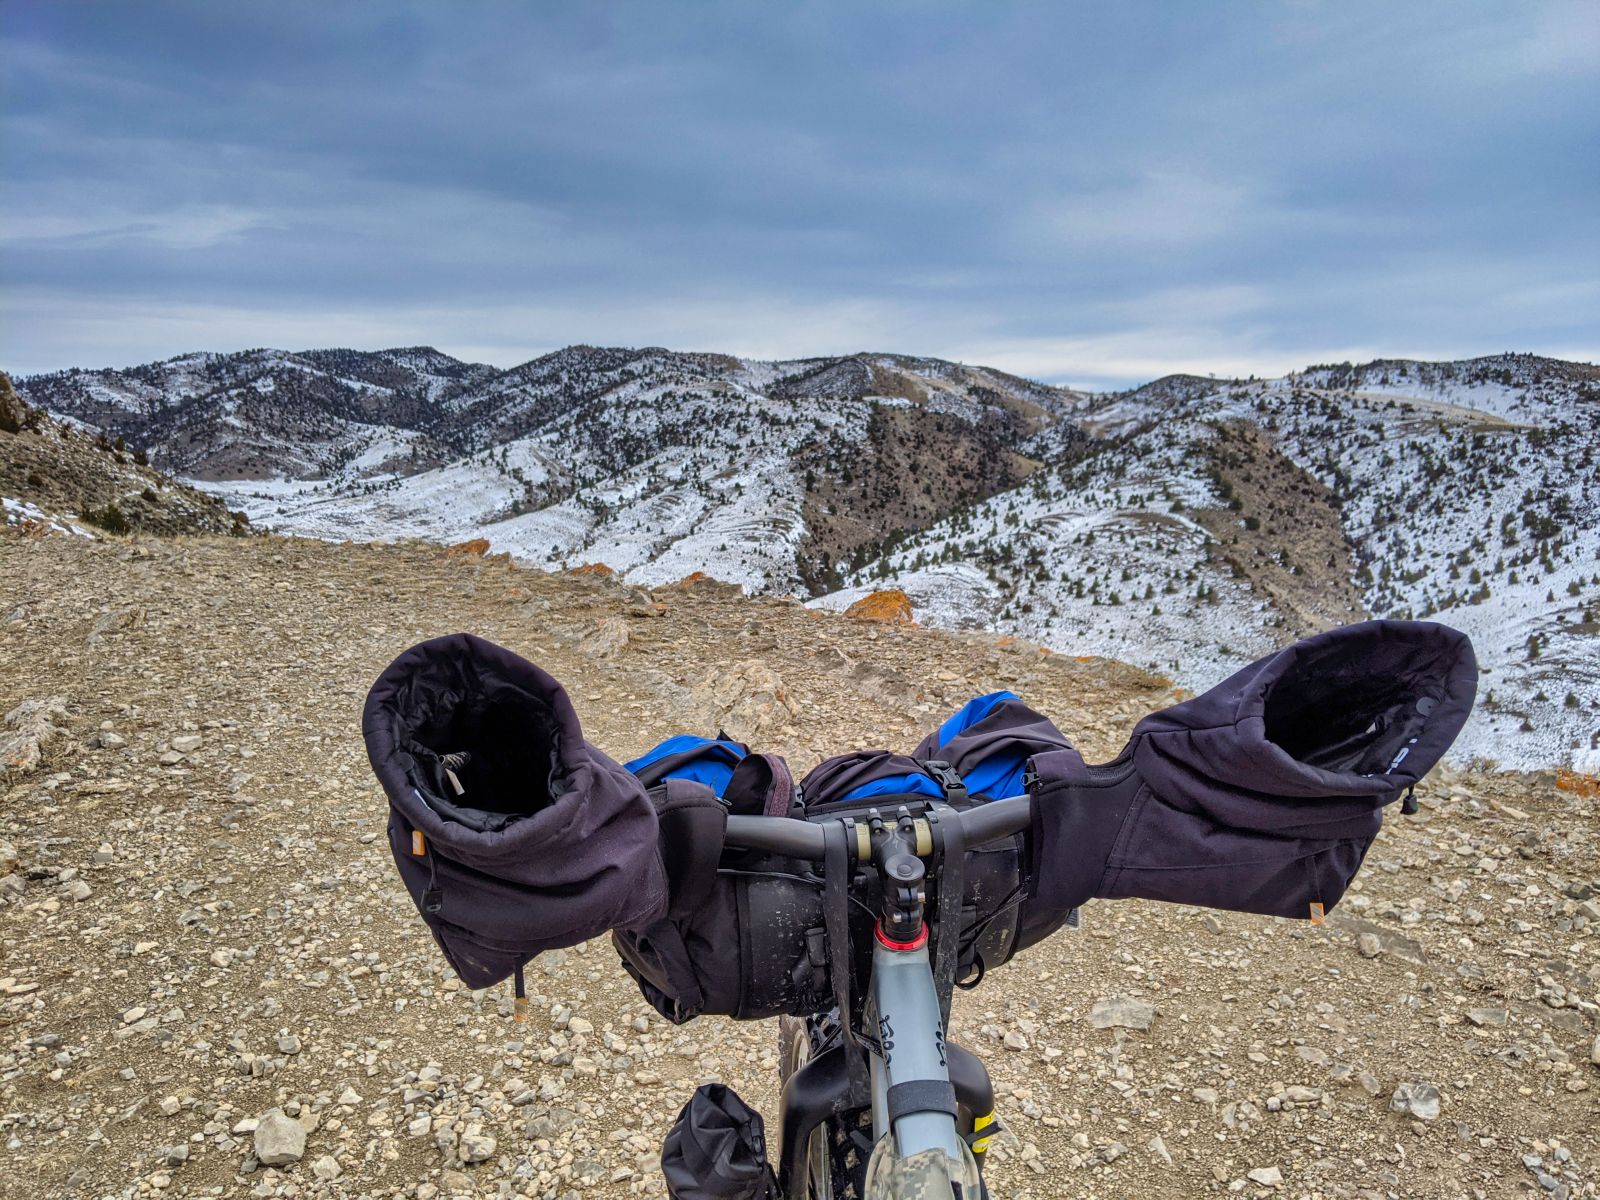 Mountain bike hand covers, called pogies on a bike in the mountains during winter